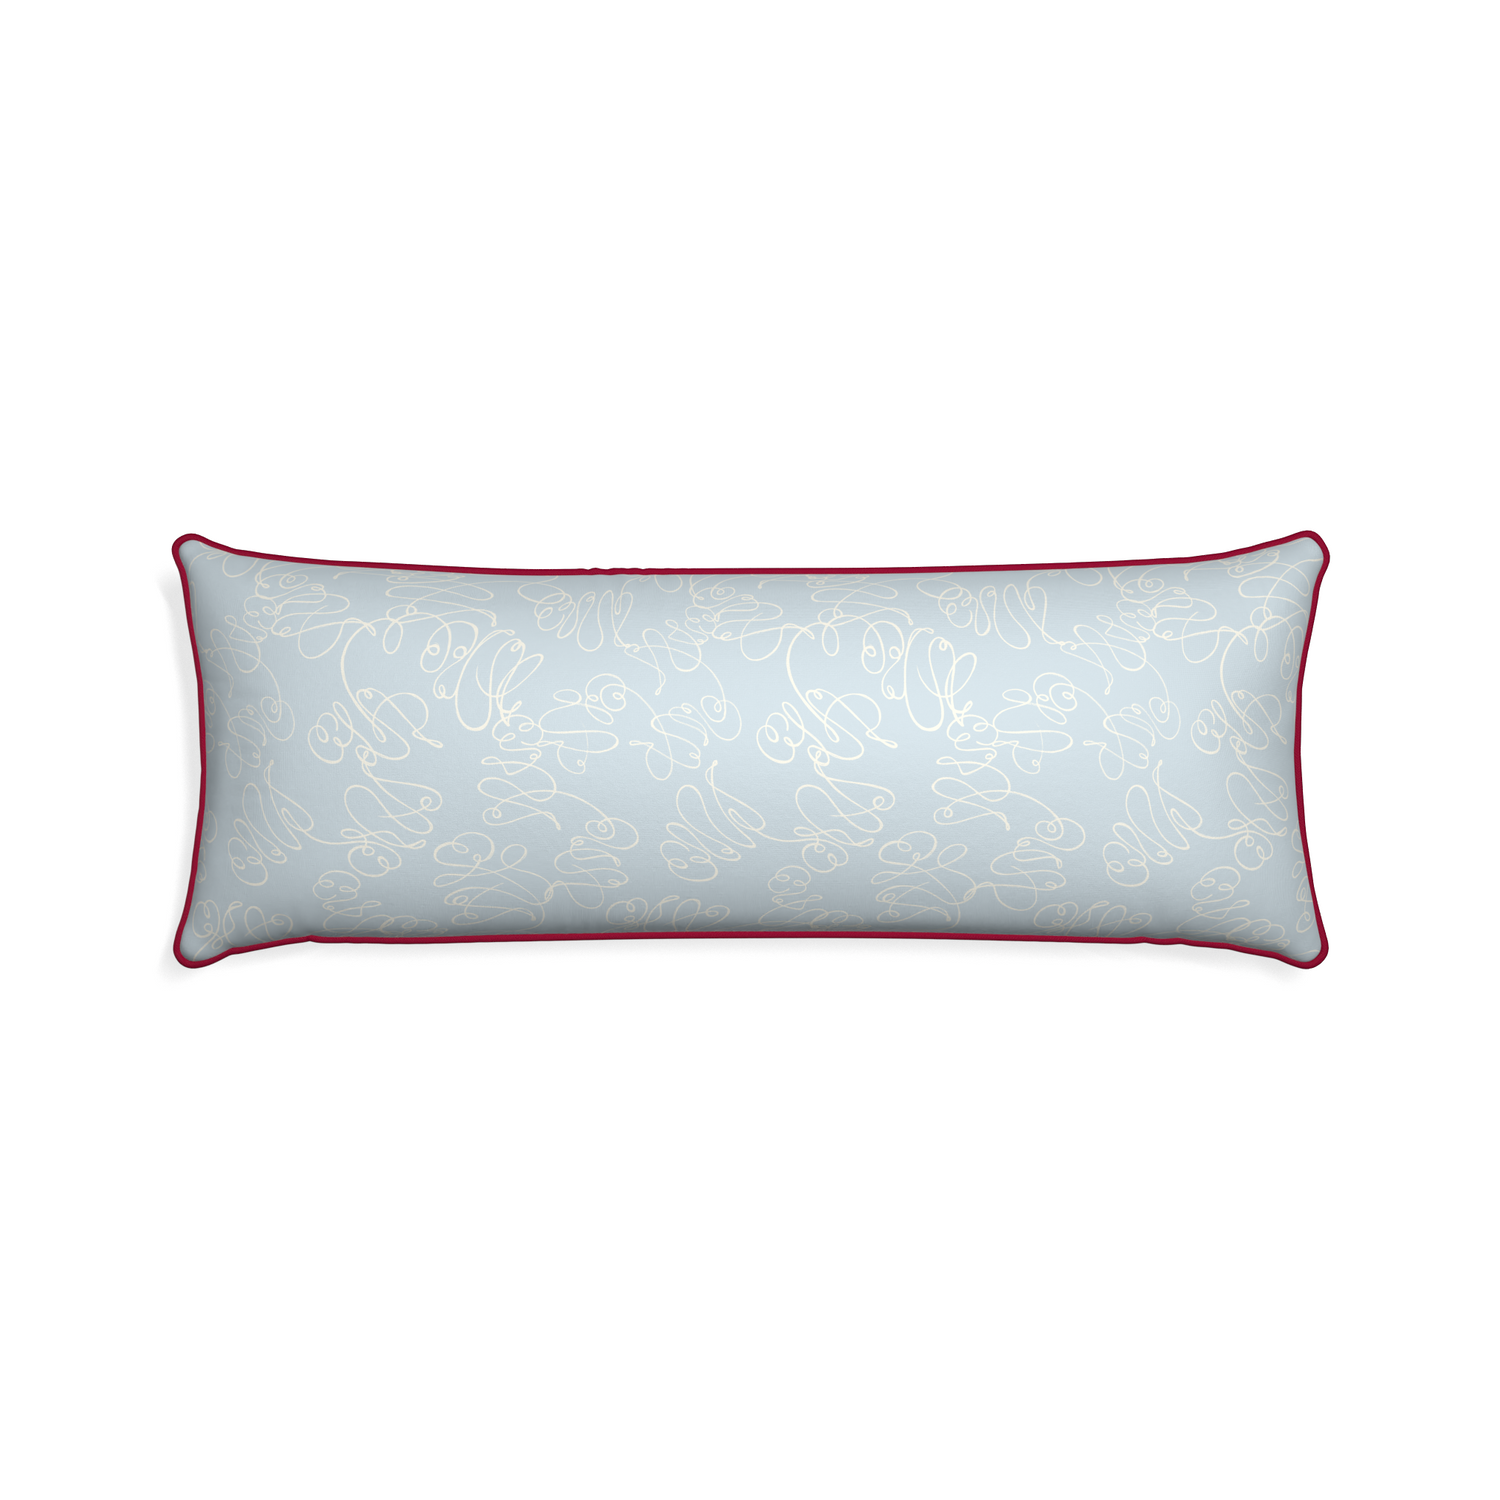 Xl-lumbar mirabella custom pillow with raspberry piping on white background